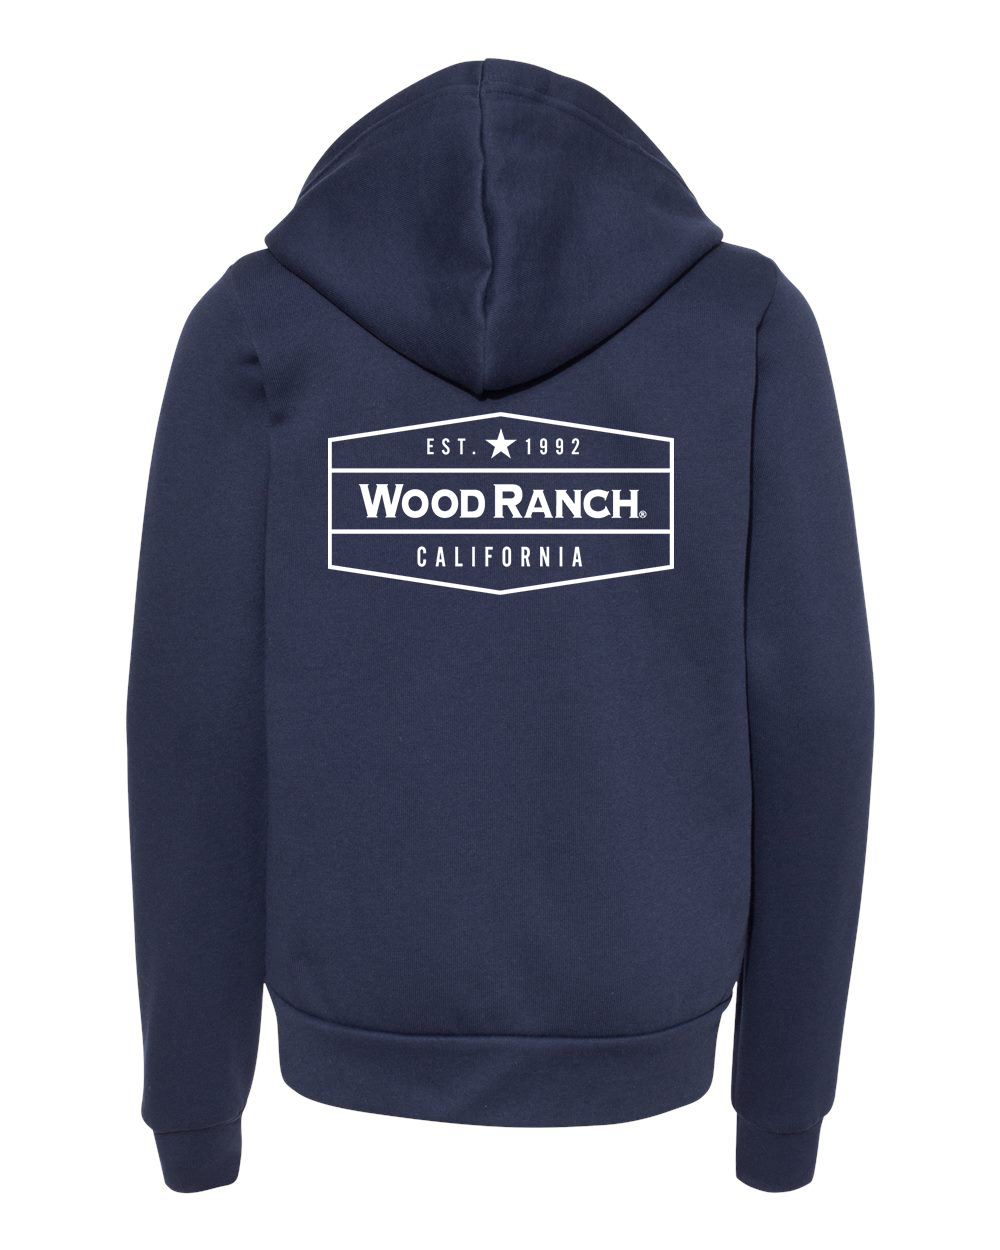 About the product. Backside of navy blue zipper hoodie style garment. White Wood Ranch emblem logo in the center. This is a youth size.